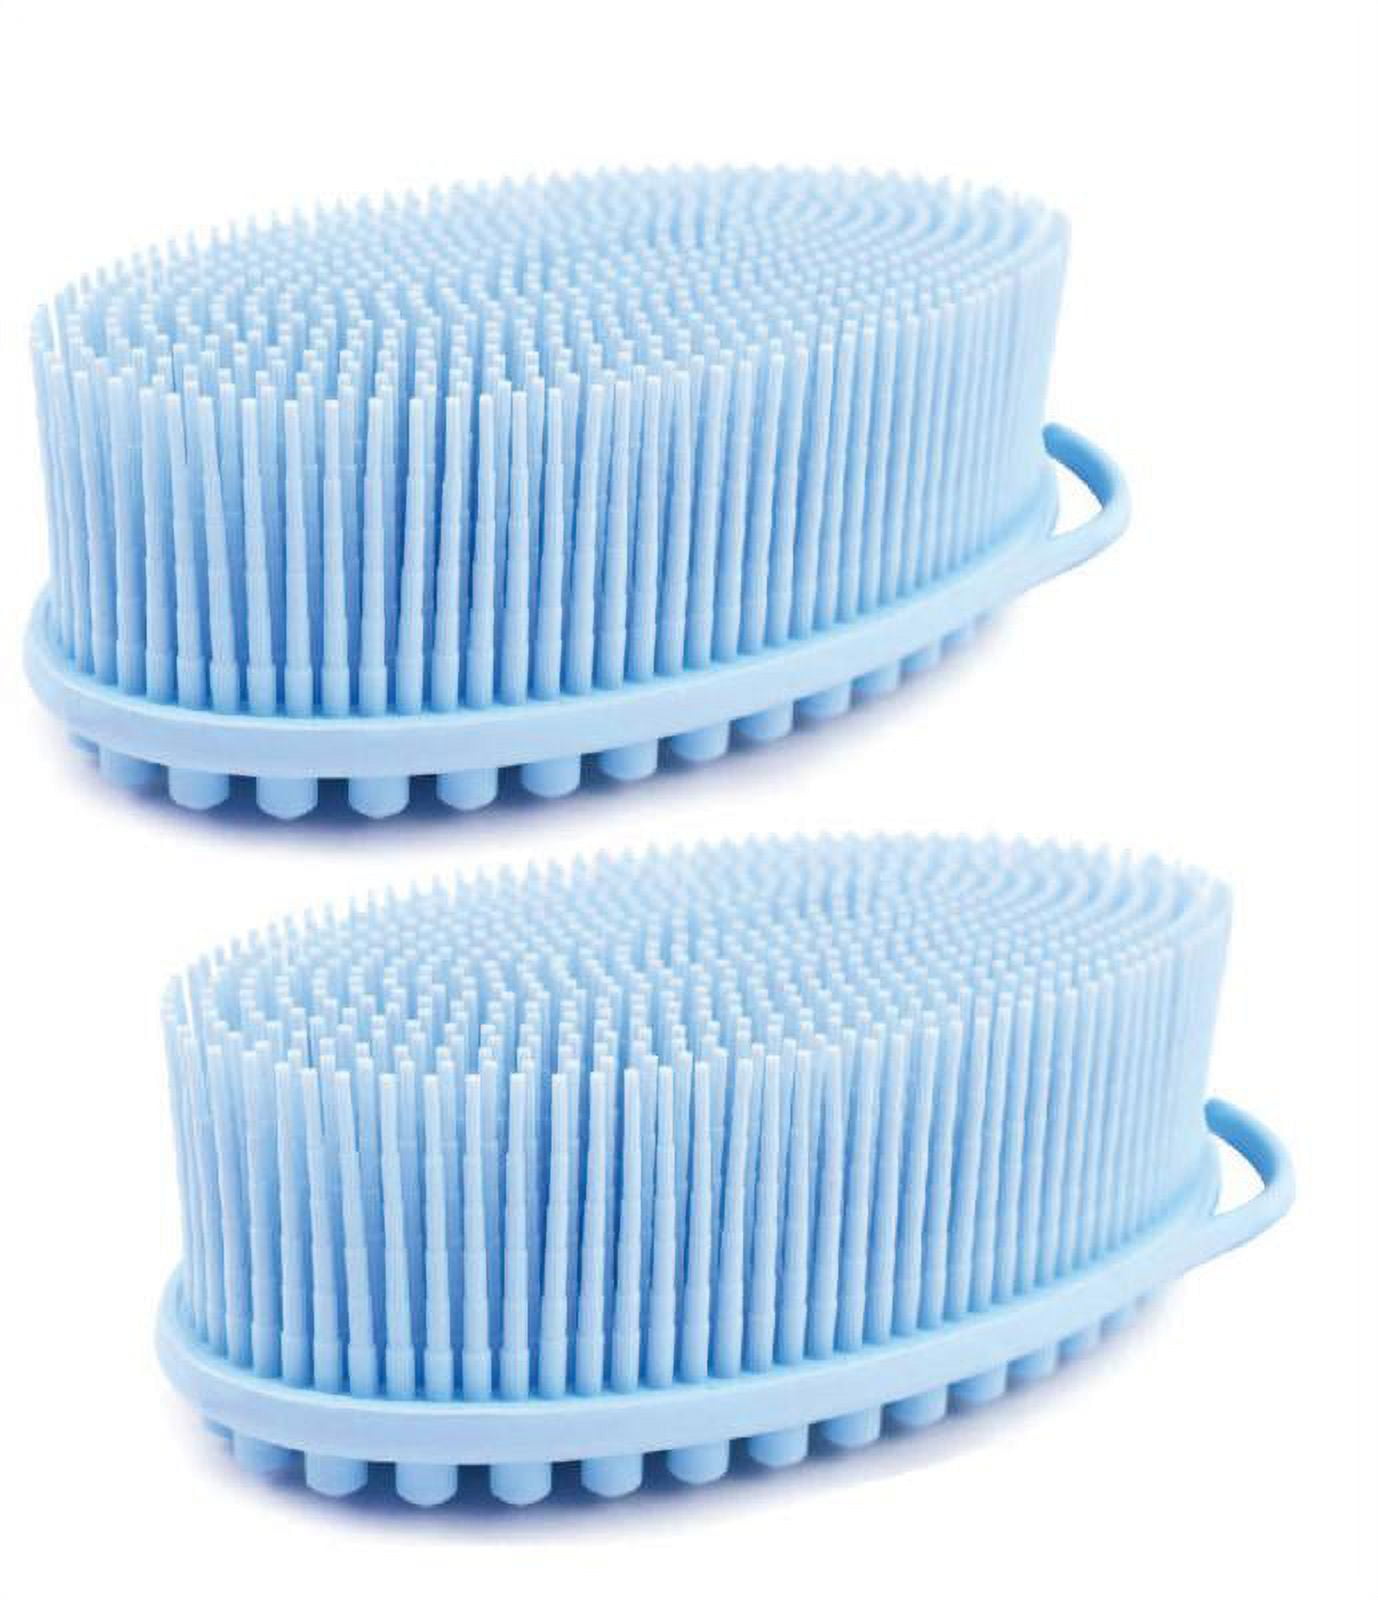 Loofah bath and utensil scrubbers – Indisutras